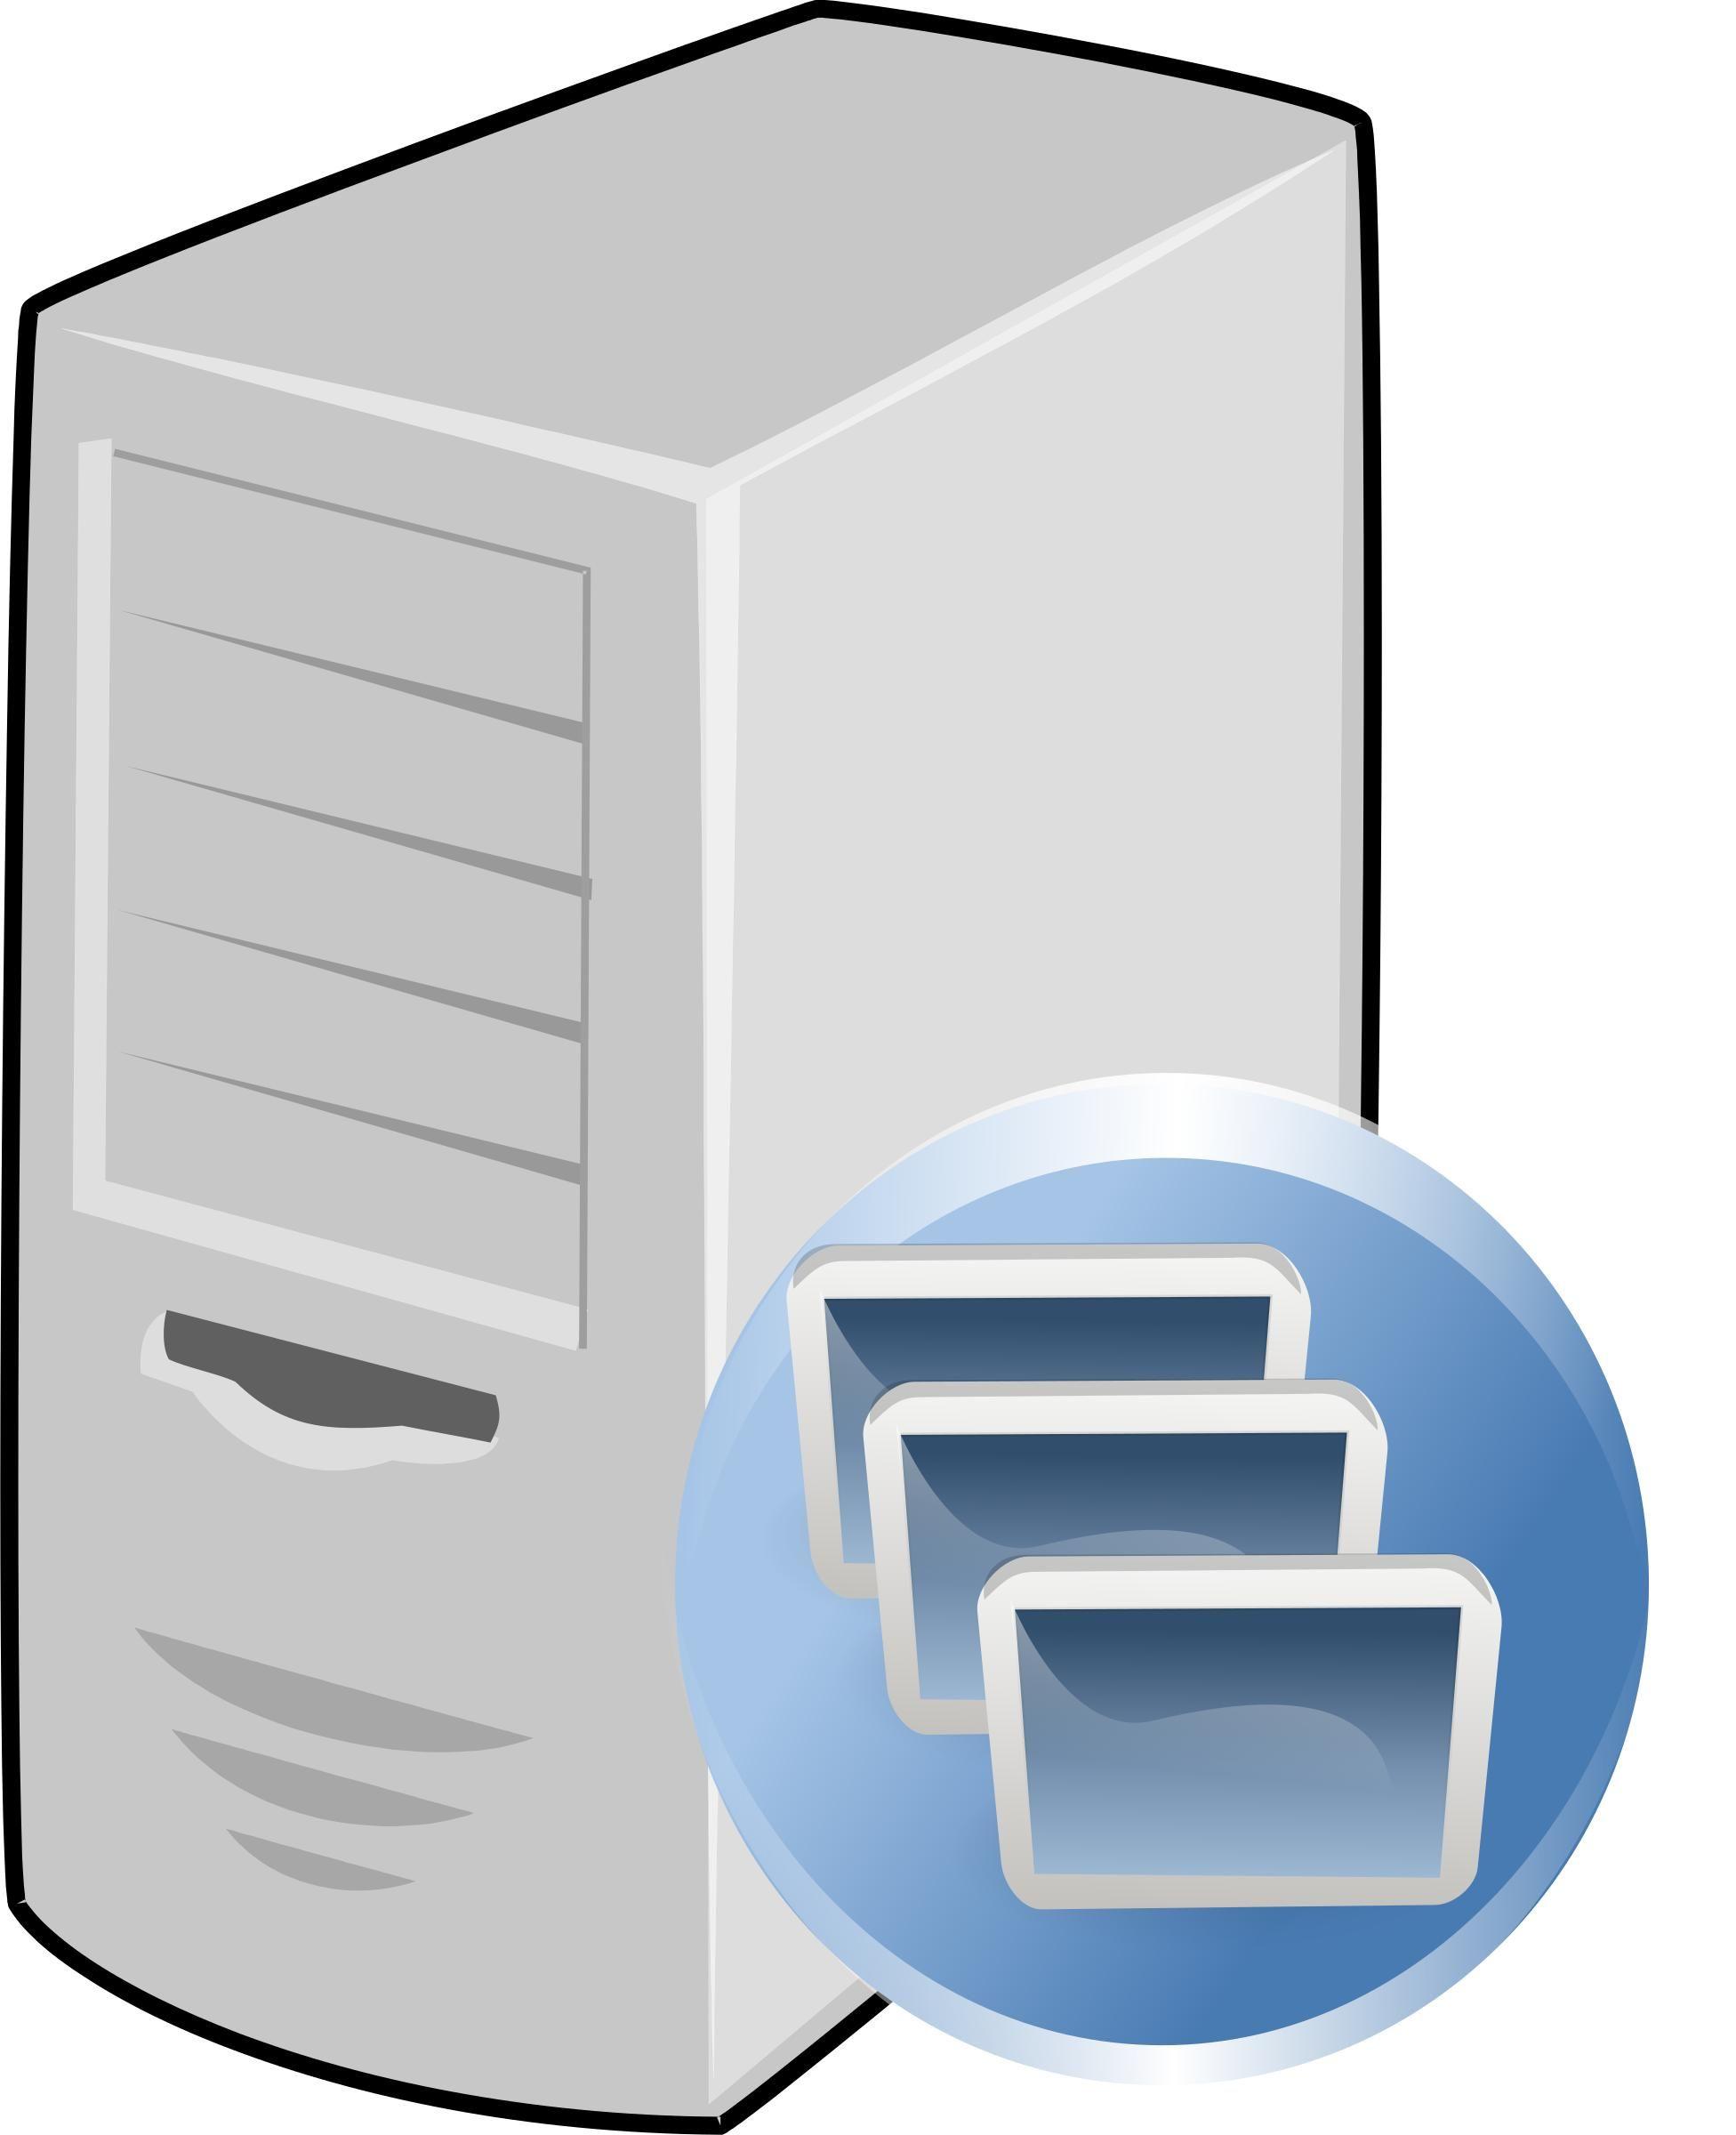 Application Server Logo - Application Server Icon PNG PNG and Icon Downloads